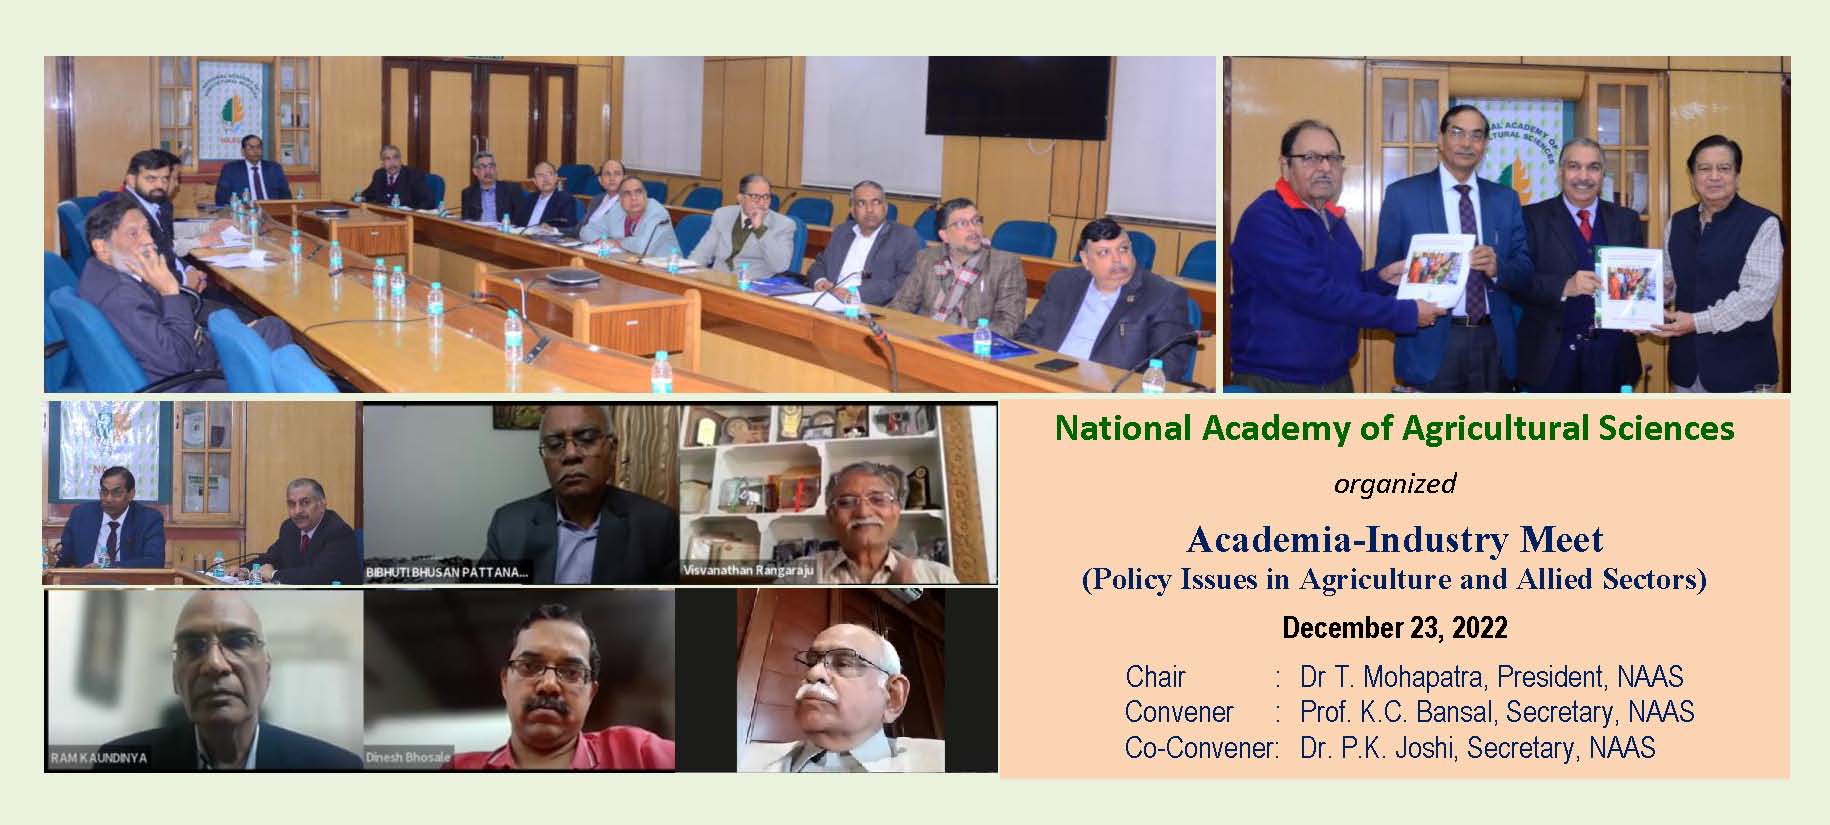 NAAS organized an Academia-Industry meet to discuss various topical issues with regard to policy development in agriculture and allied sectors